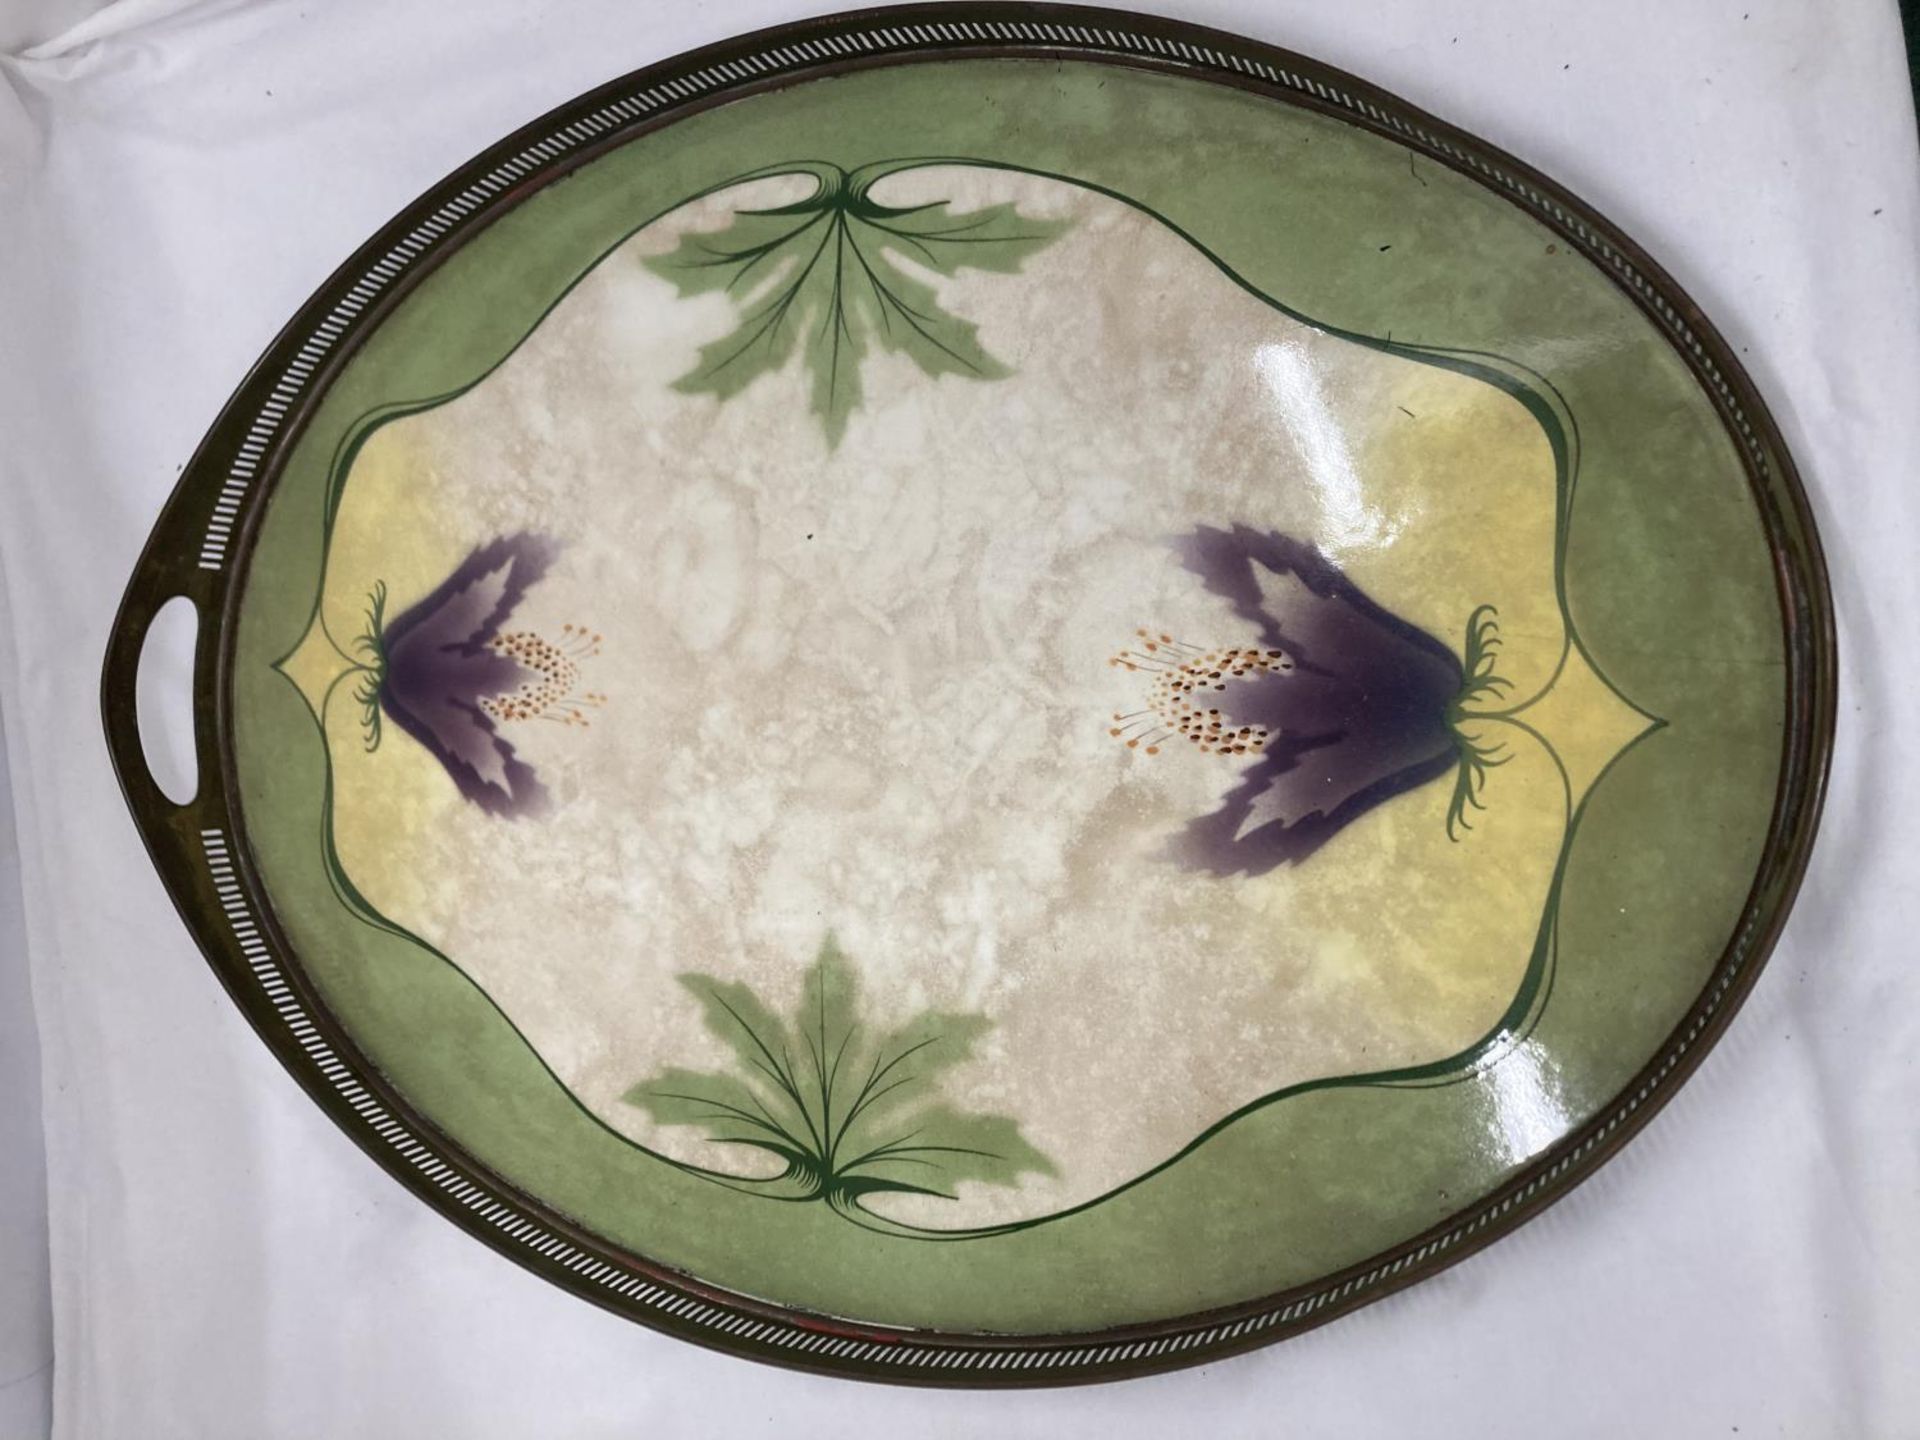 AN ART NOUVEAU STYLE BRASS AND CERAMIC TRAY WITH GALLERIED SIDES ADORNED WITH FLOWERS AND LEAVES - Image 4 of 4